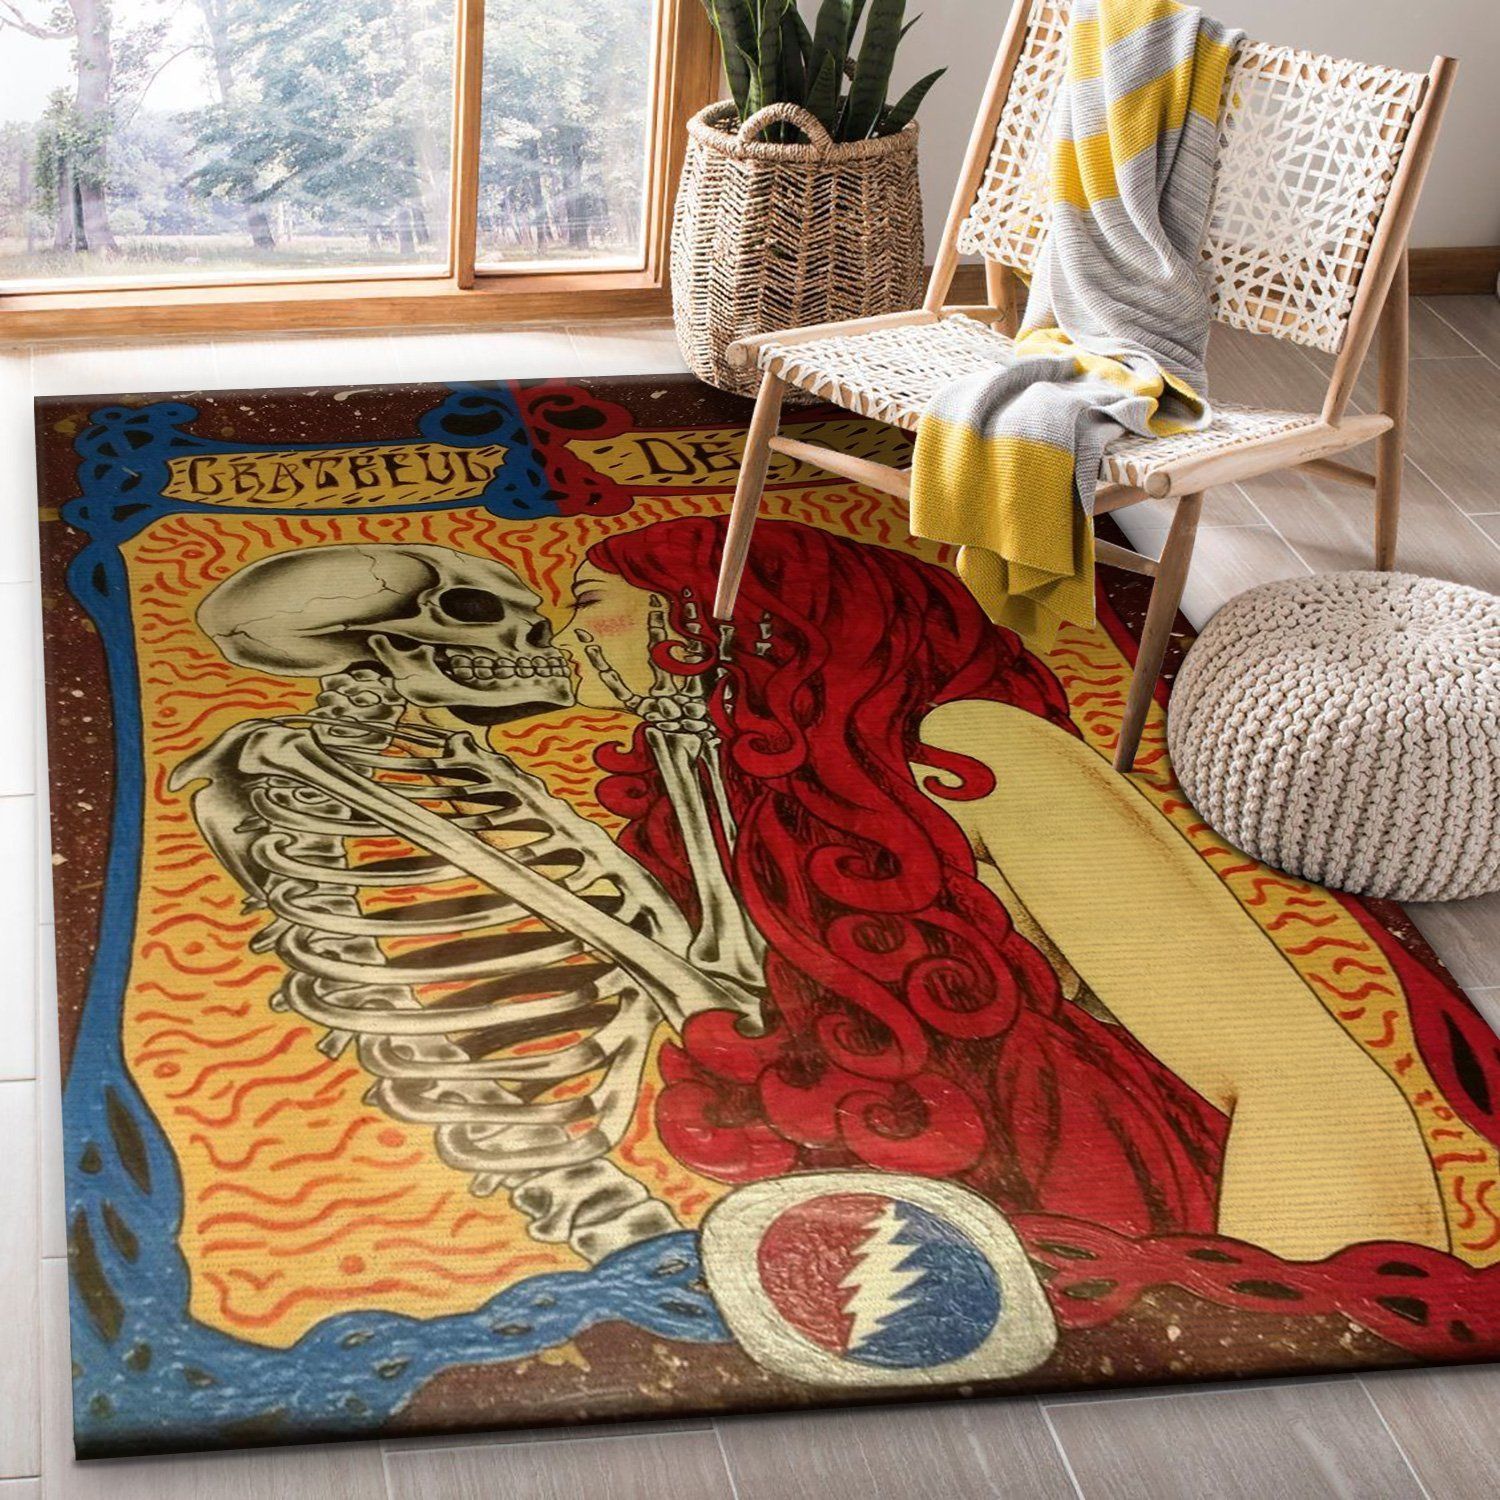 Grateful Dead Area Rug For Christmas Living room and bedroom Rug Home Decor Floor Decor - Indoor Outdoor Rugs